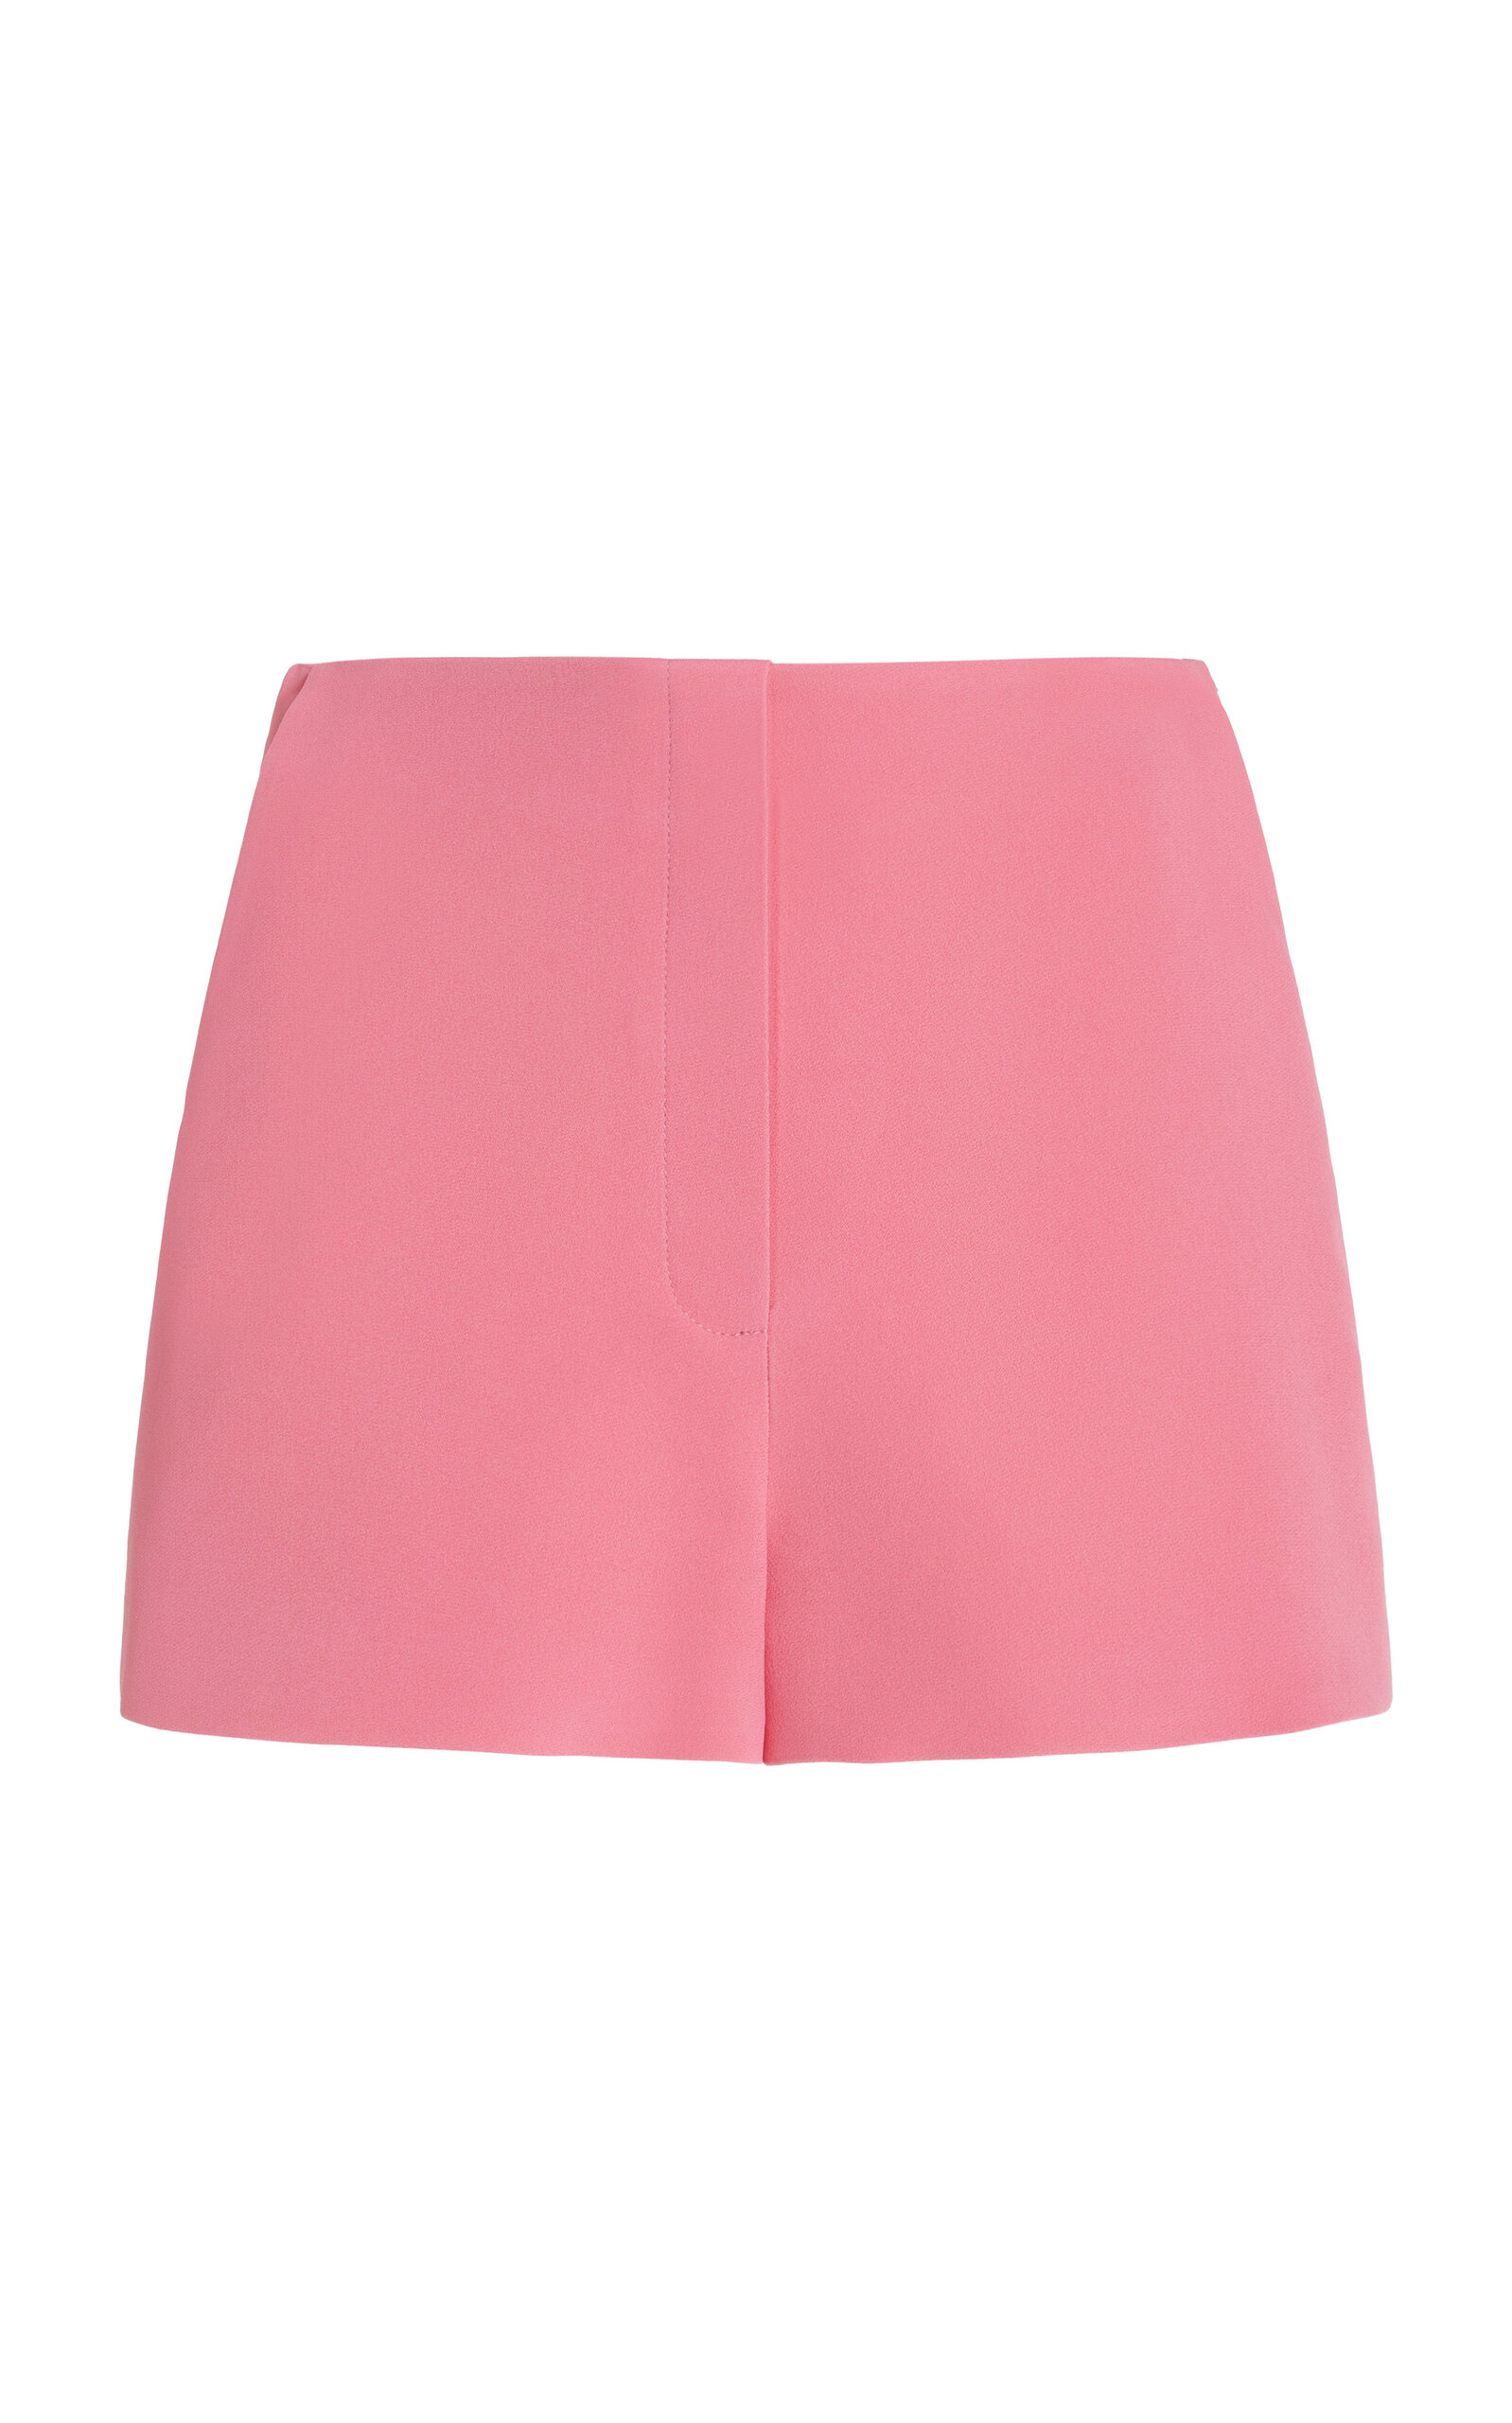 Elie Saab Cady Shorts In Pink